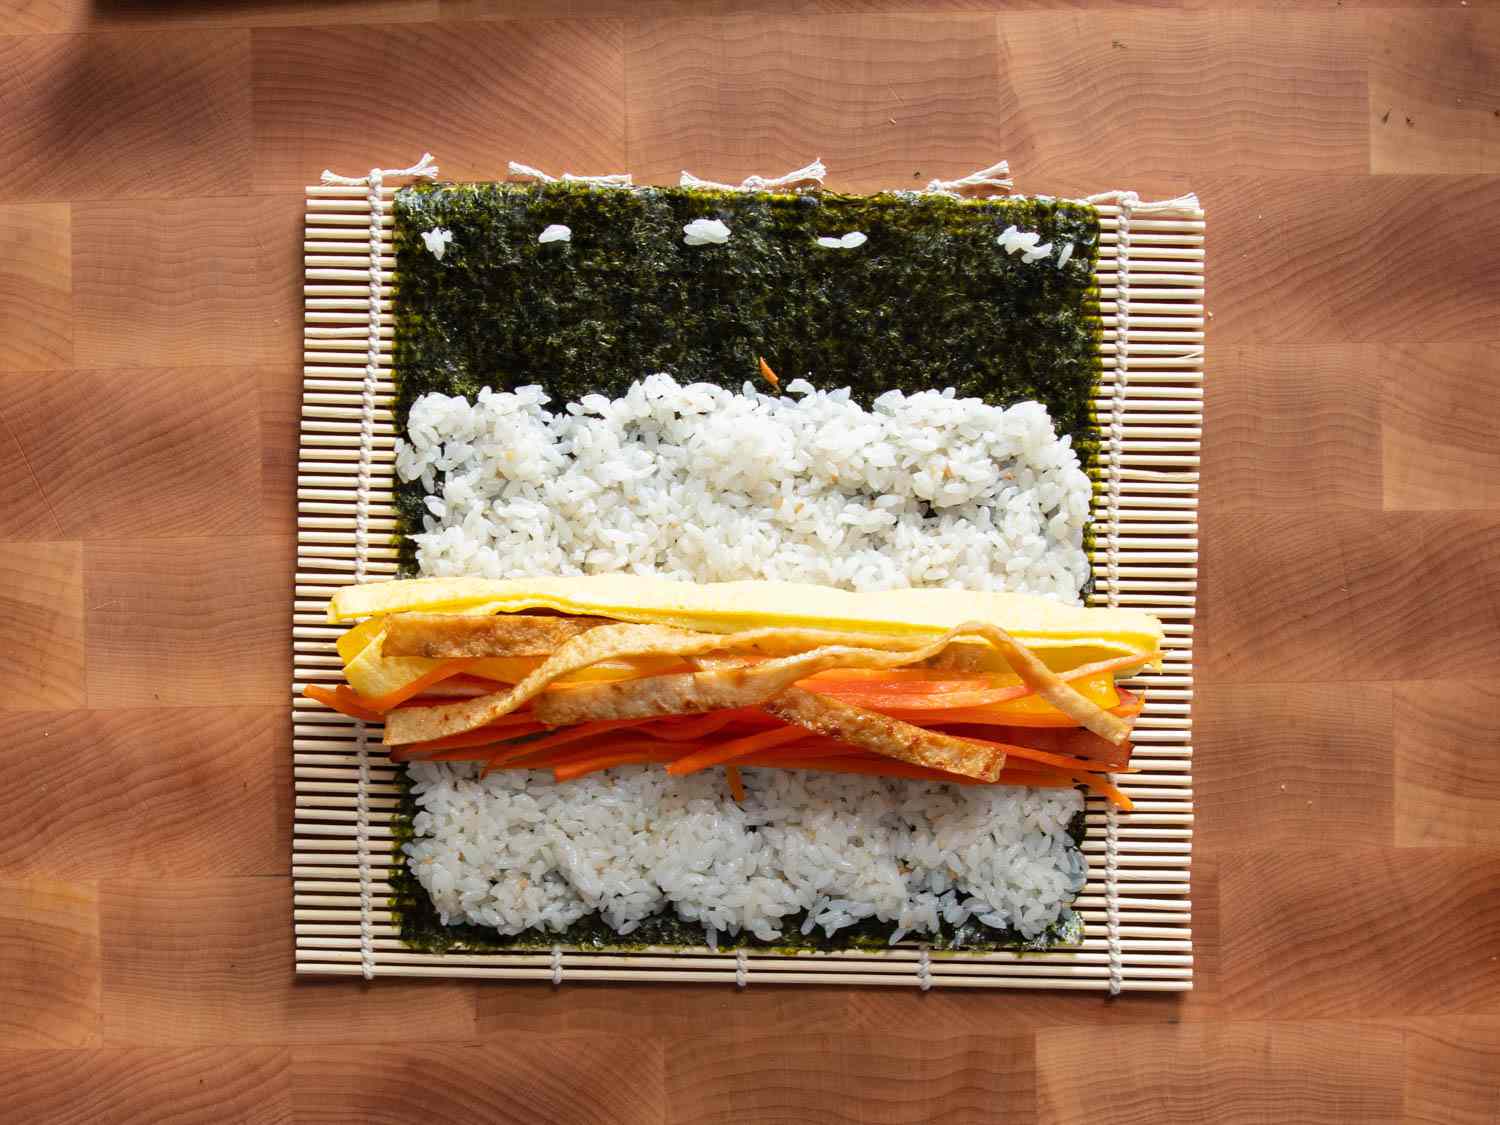 Overhead shot of thinly sliced fillings and rice spread out over a sheet of seaweed.